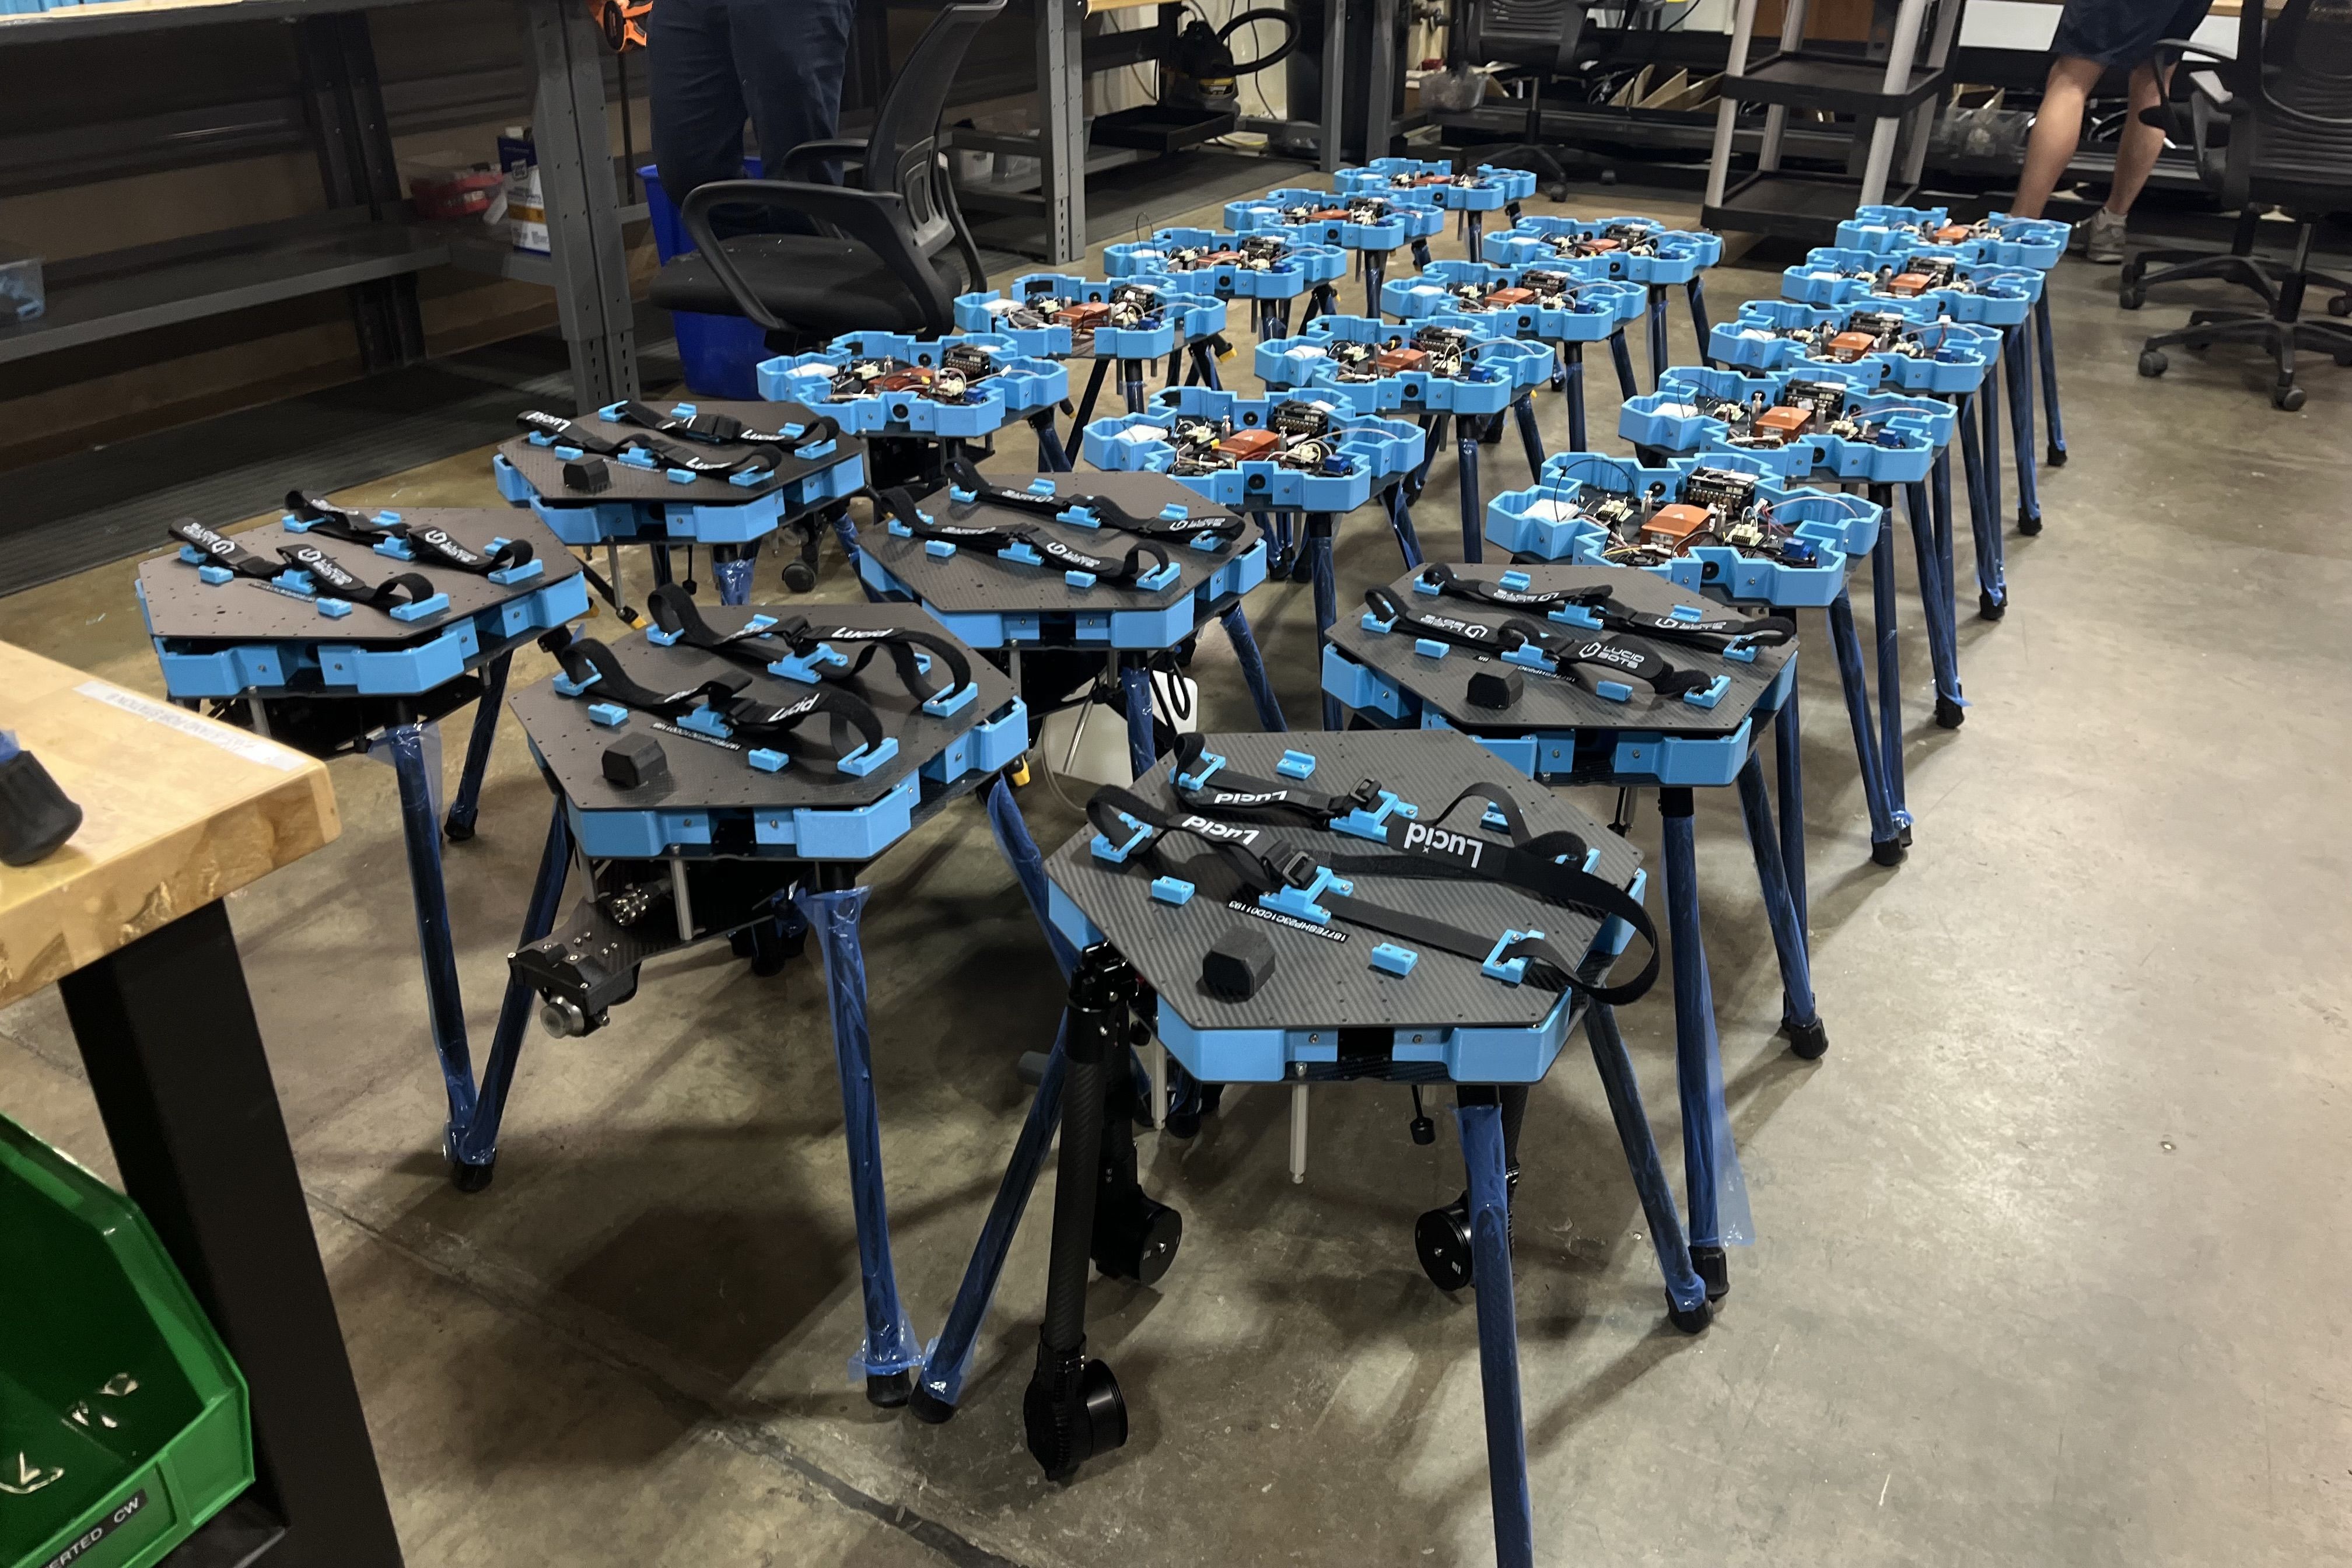 Assembly line of drones